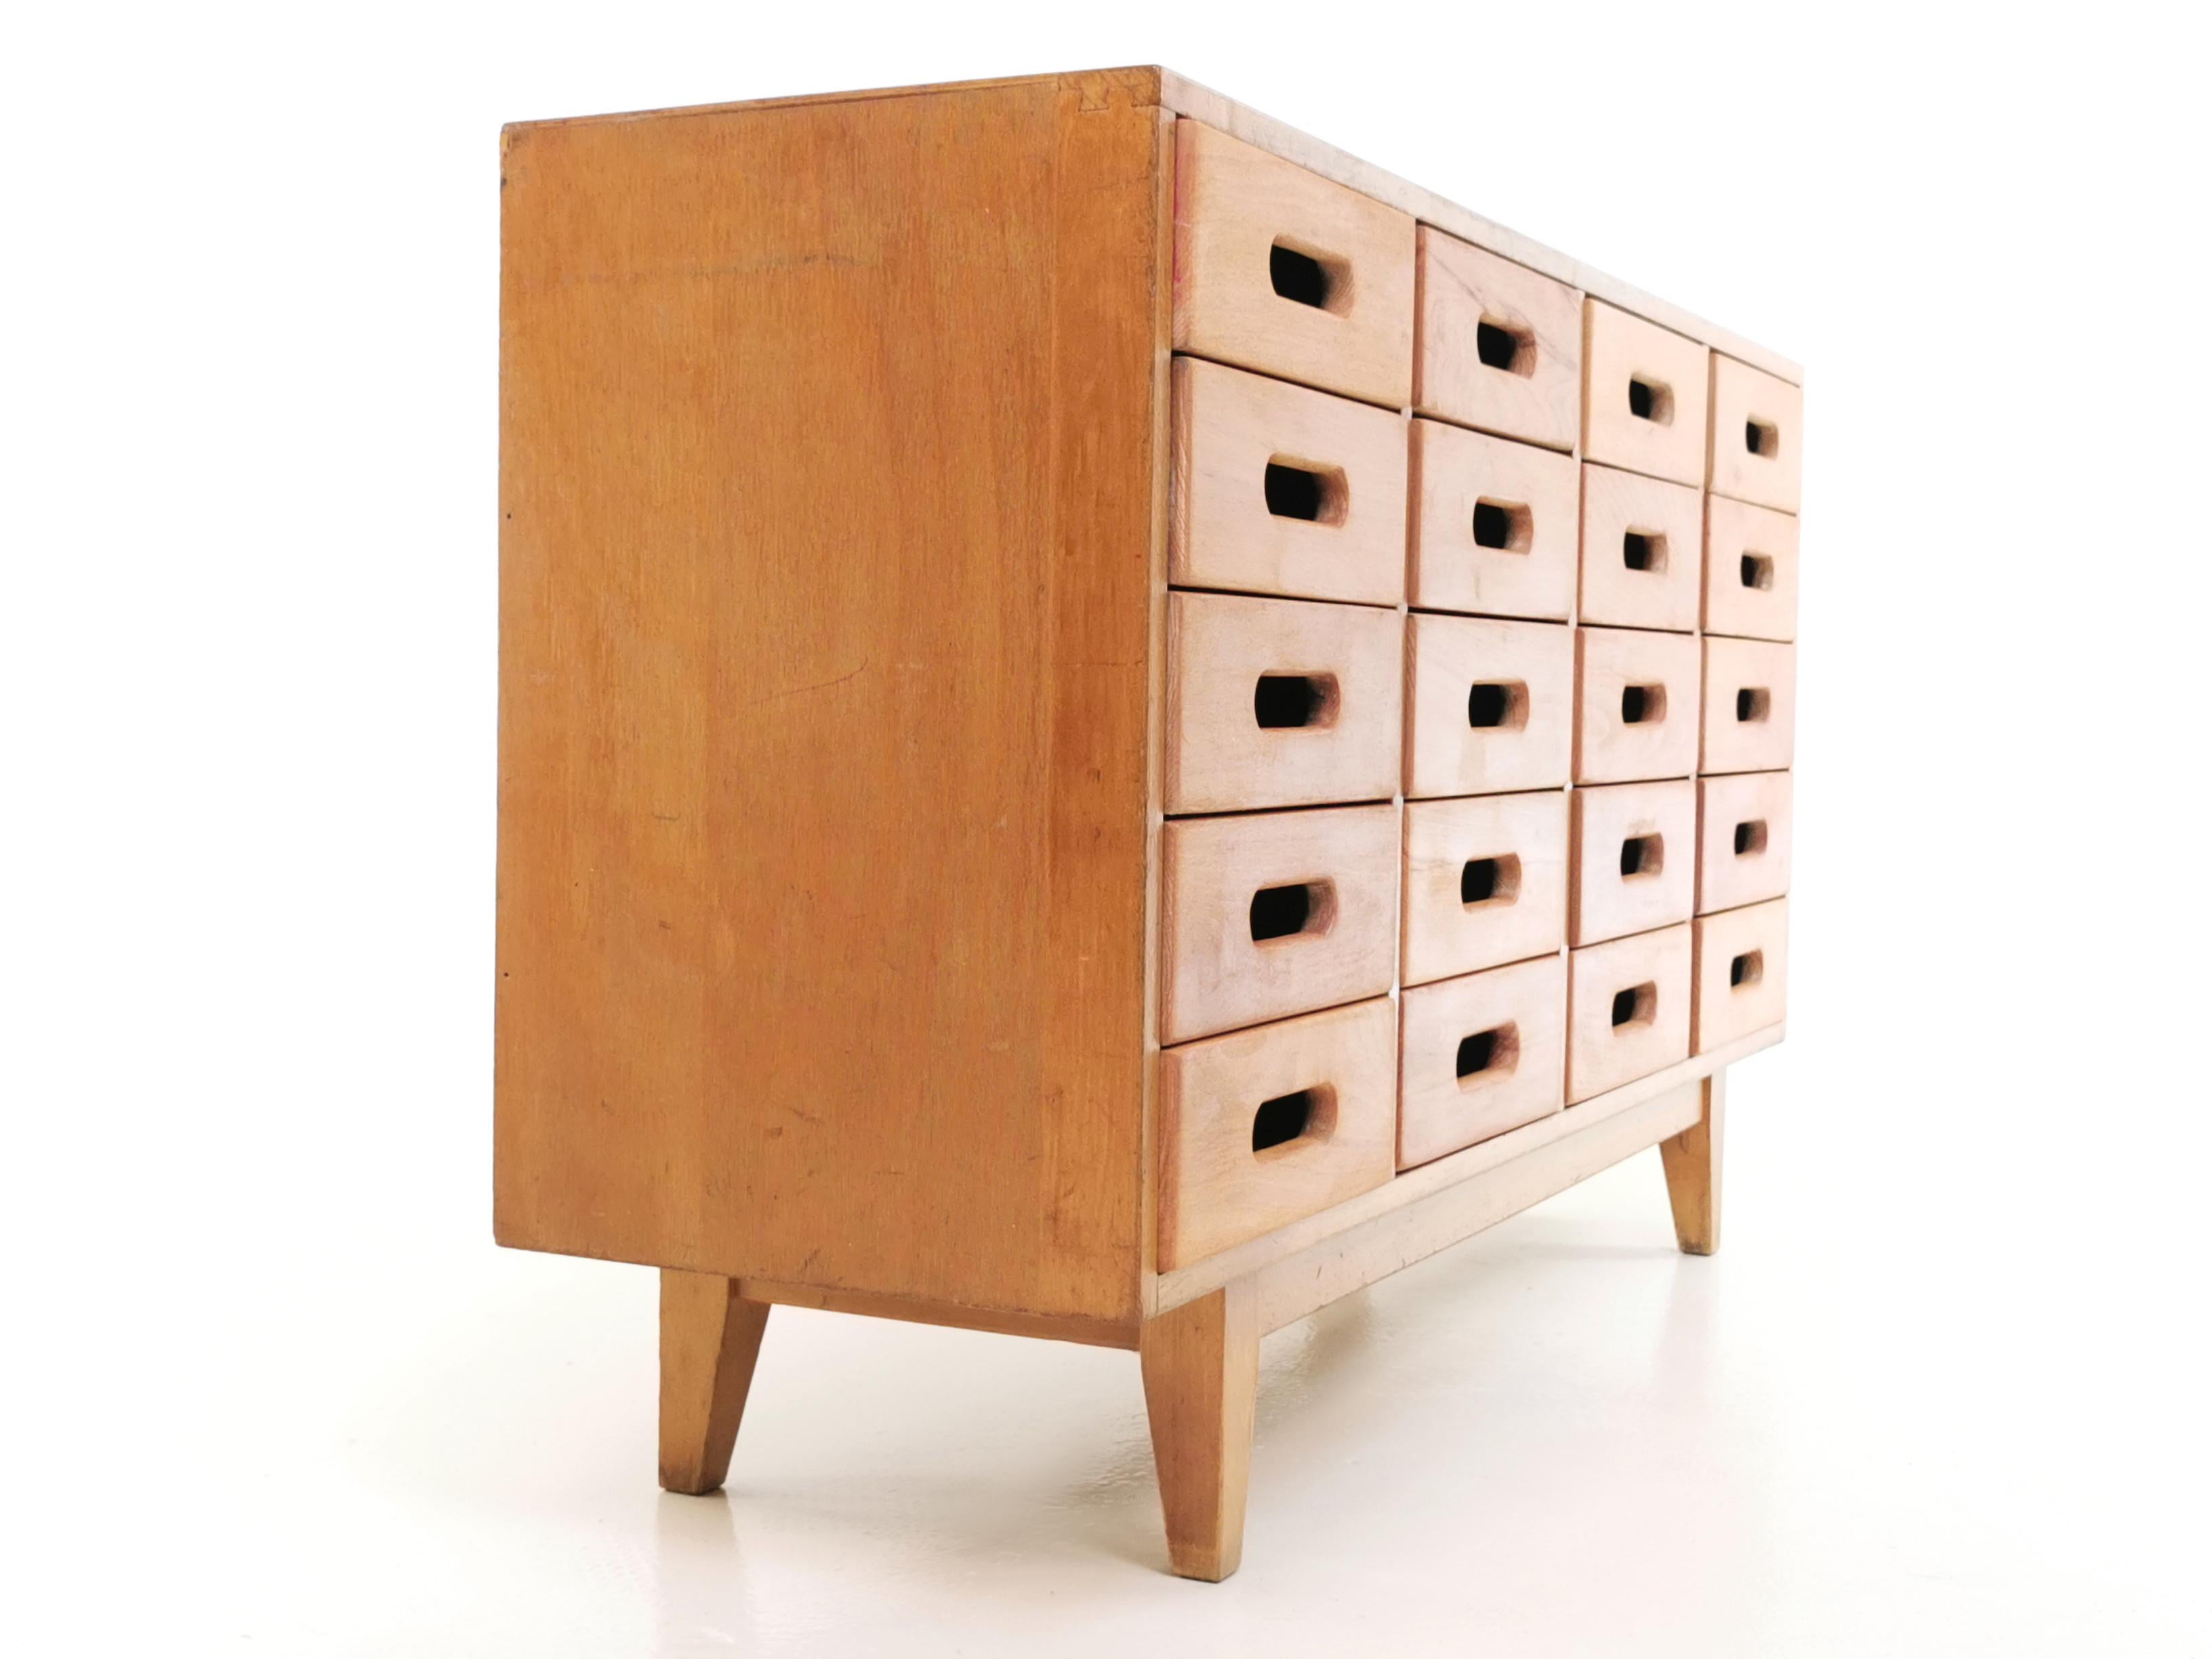 European Midcentury Sideboard Chest of Drawers by James Leonard for Esavian